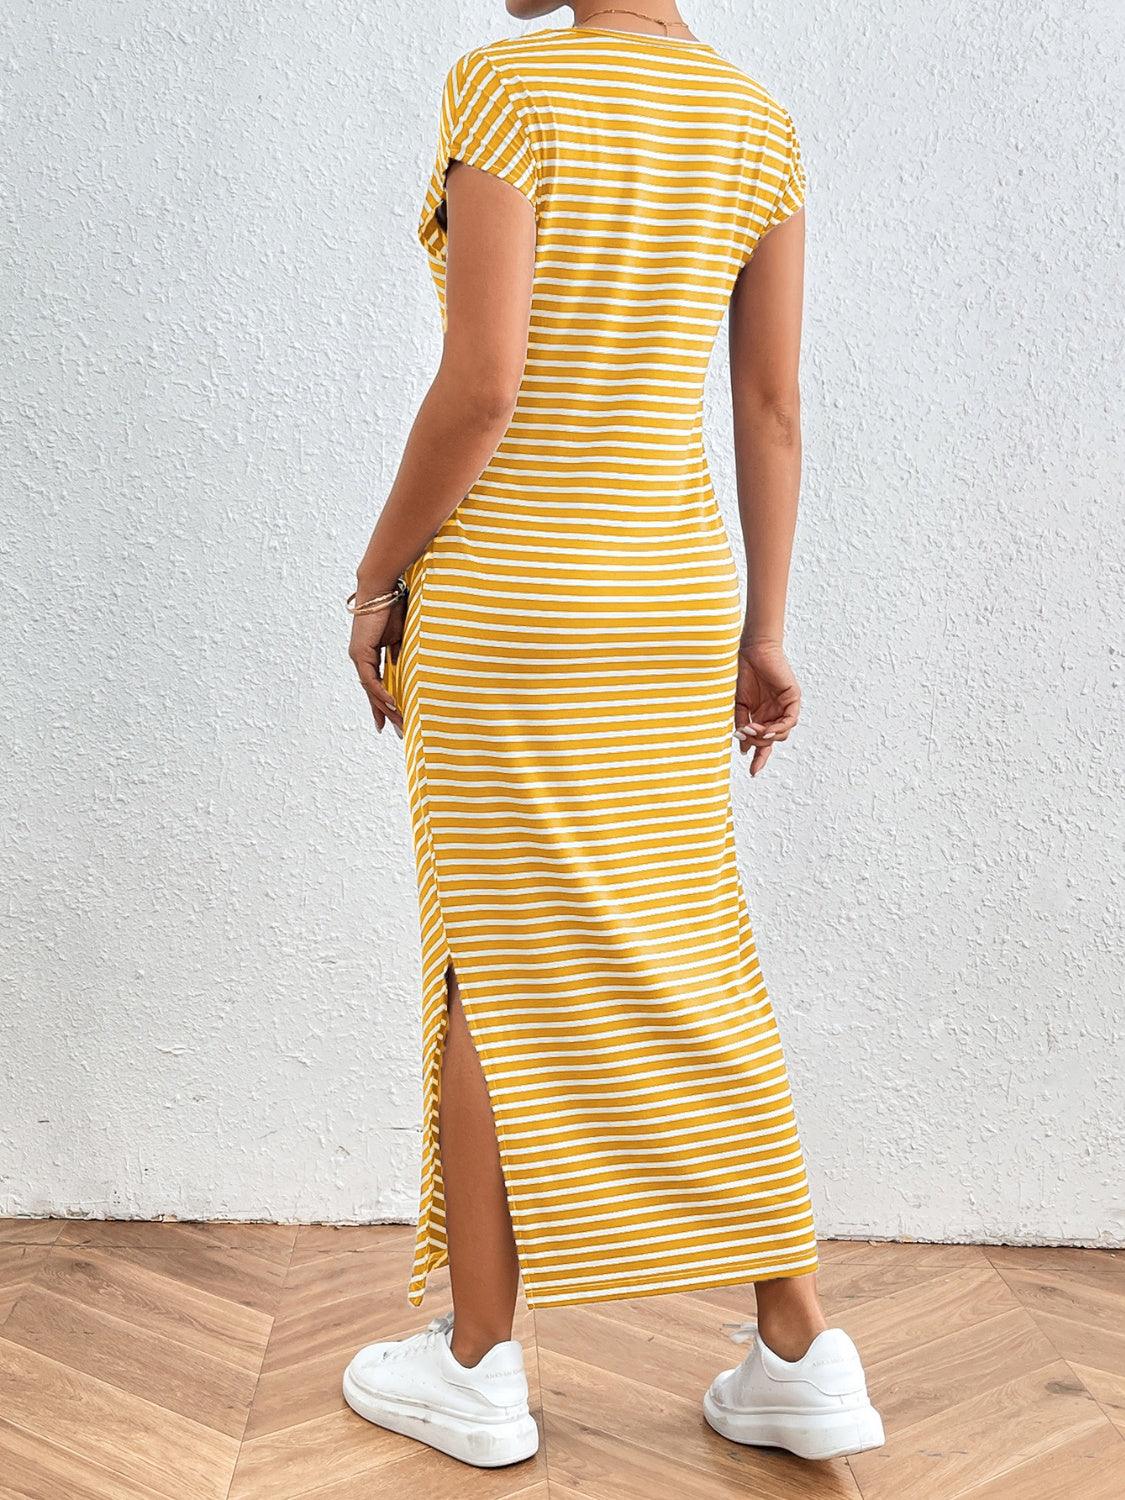 Tied Striped Tee Dress in 6 Colors - Olive Ave